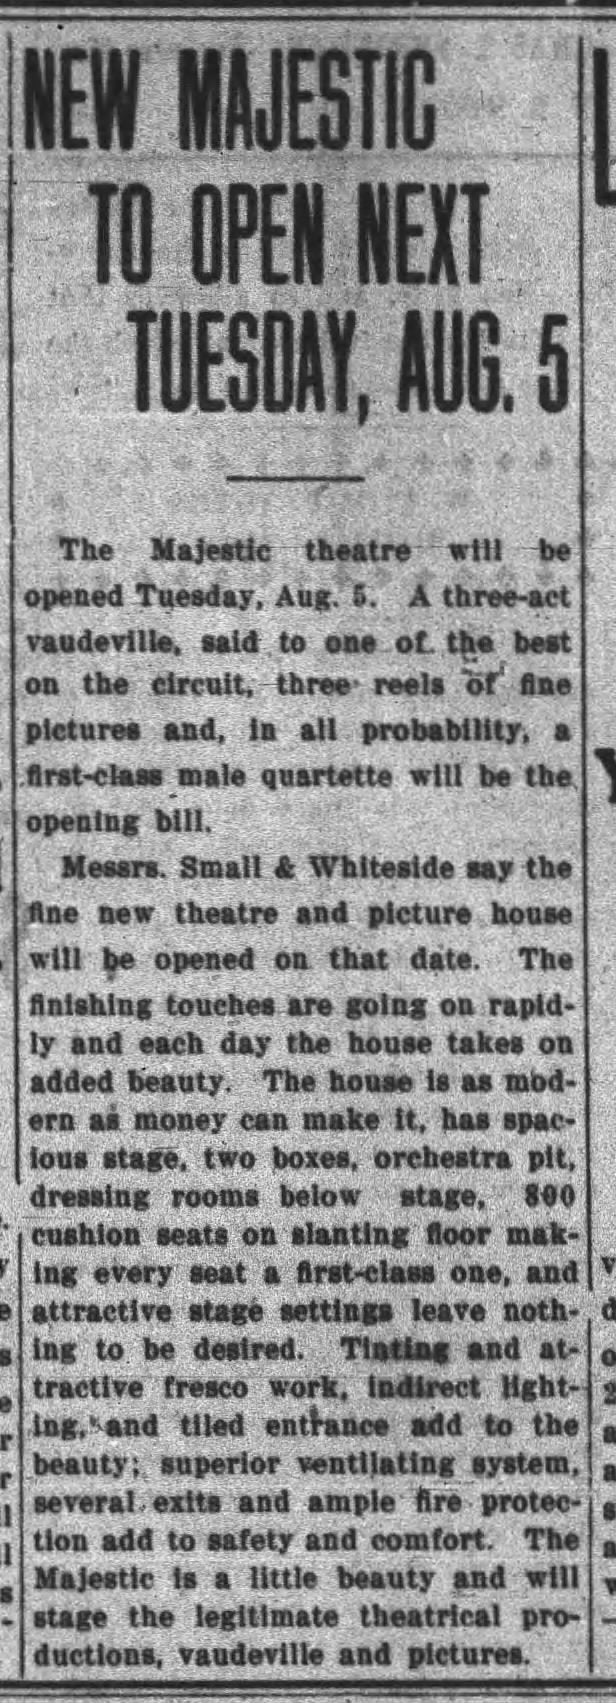 Majestic theater opens, 1913